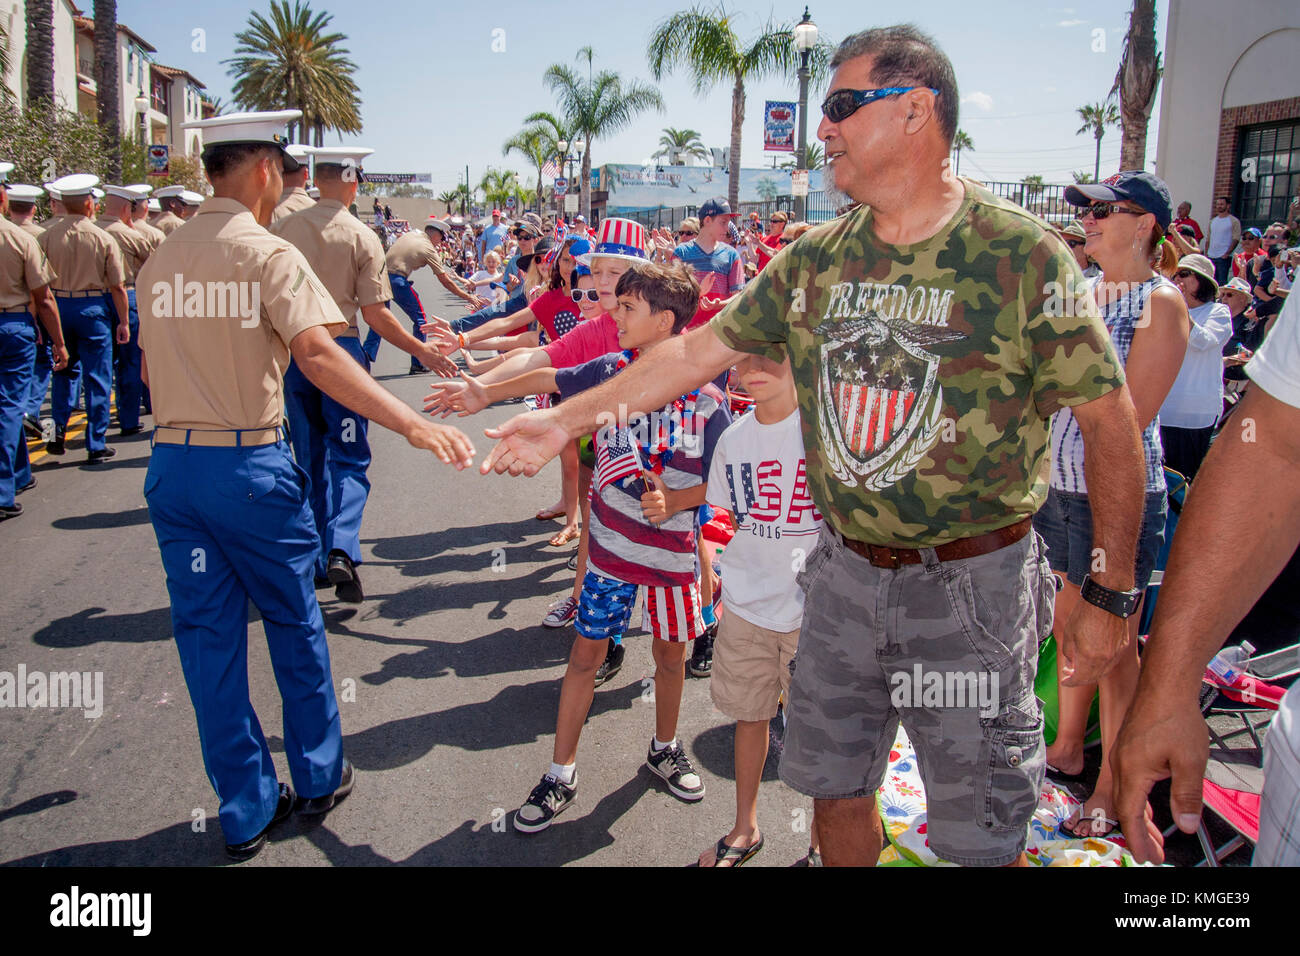 Uniformed US Marine participants in a July 4th parade in Huntington Beach, CA, receive patriotic handshakes from spectators. Note T shirt. Stock Photo